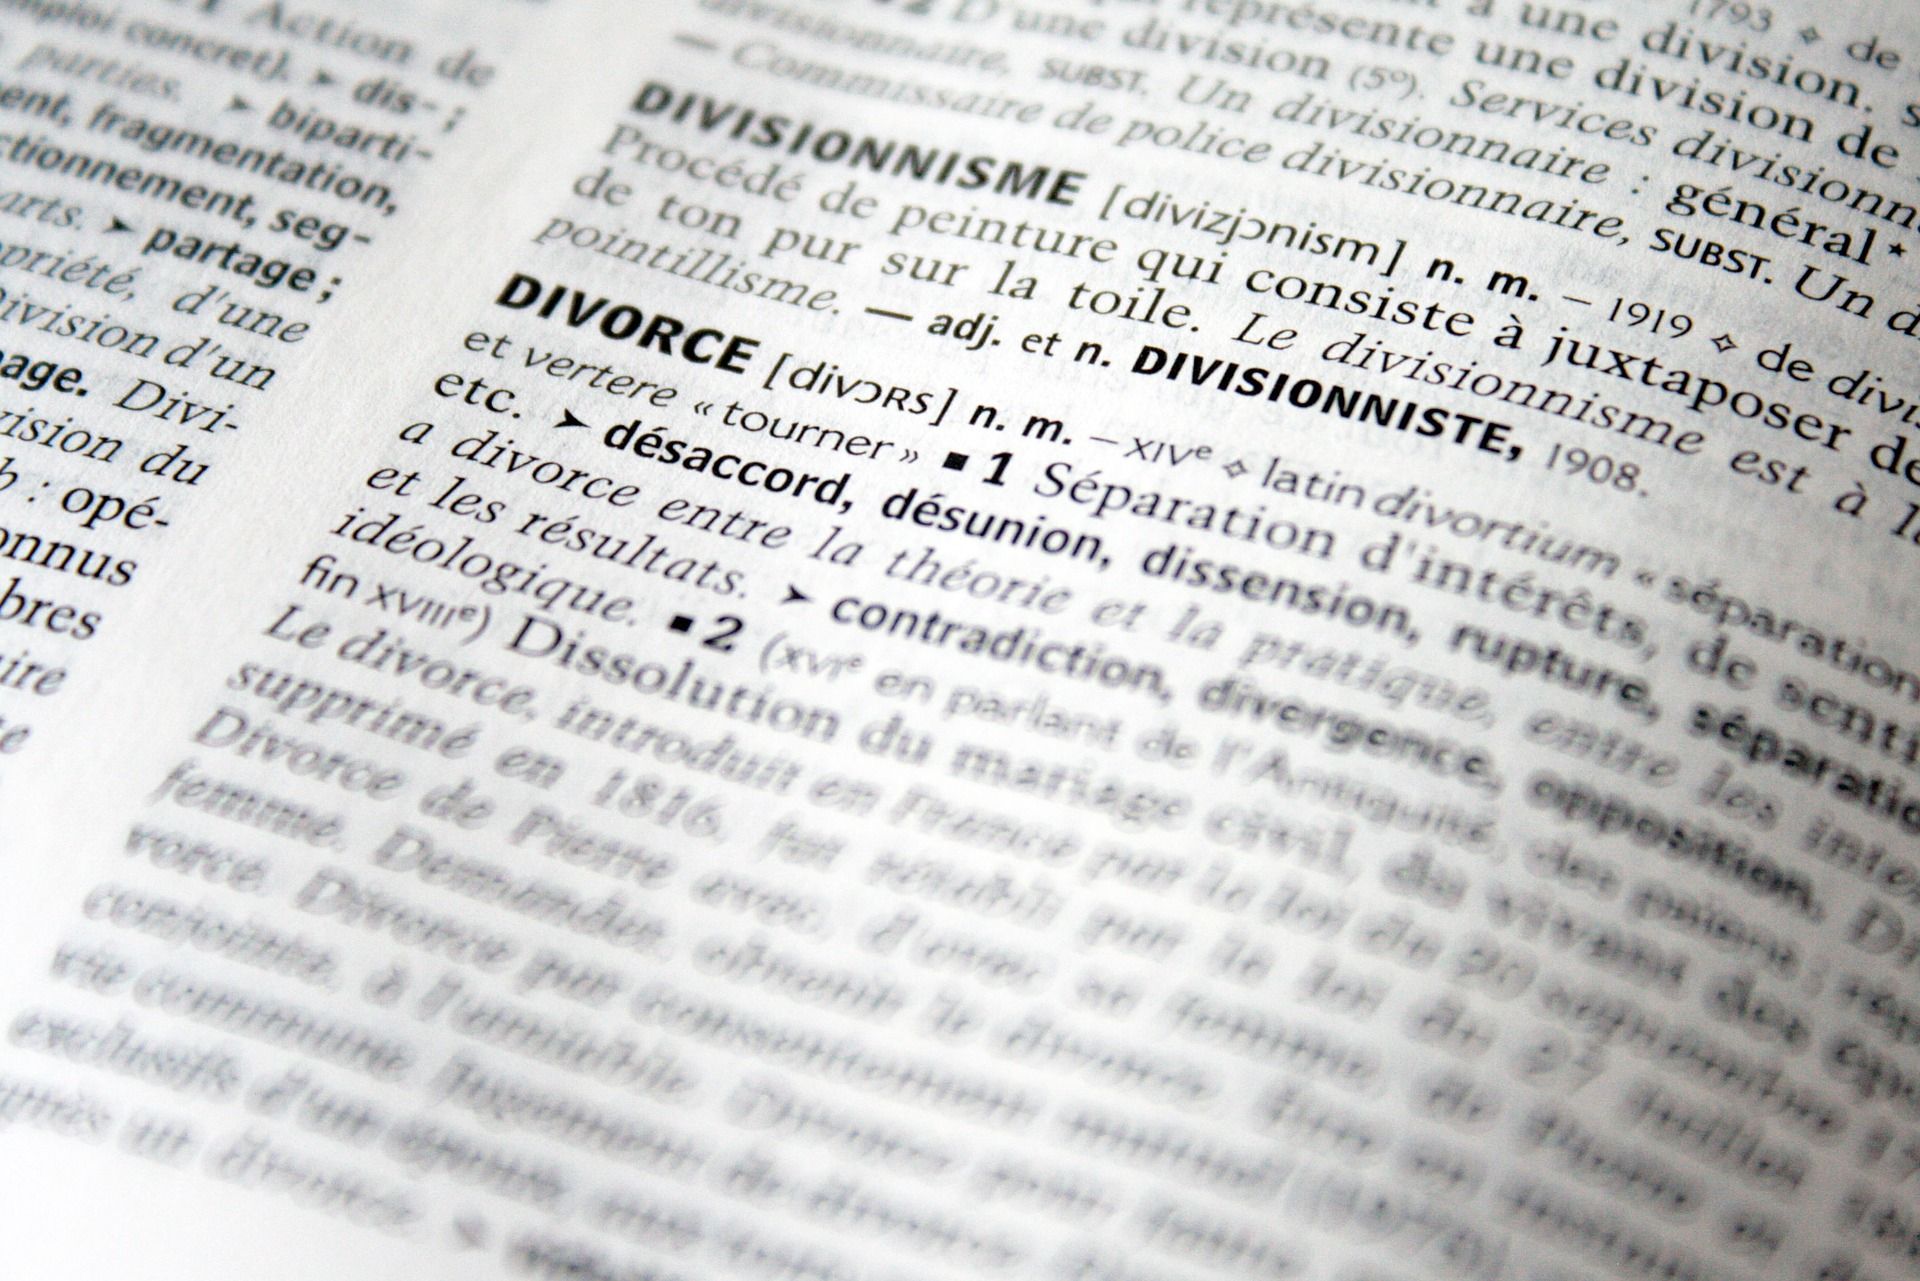 divorce in the dictionary